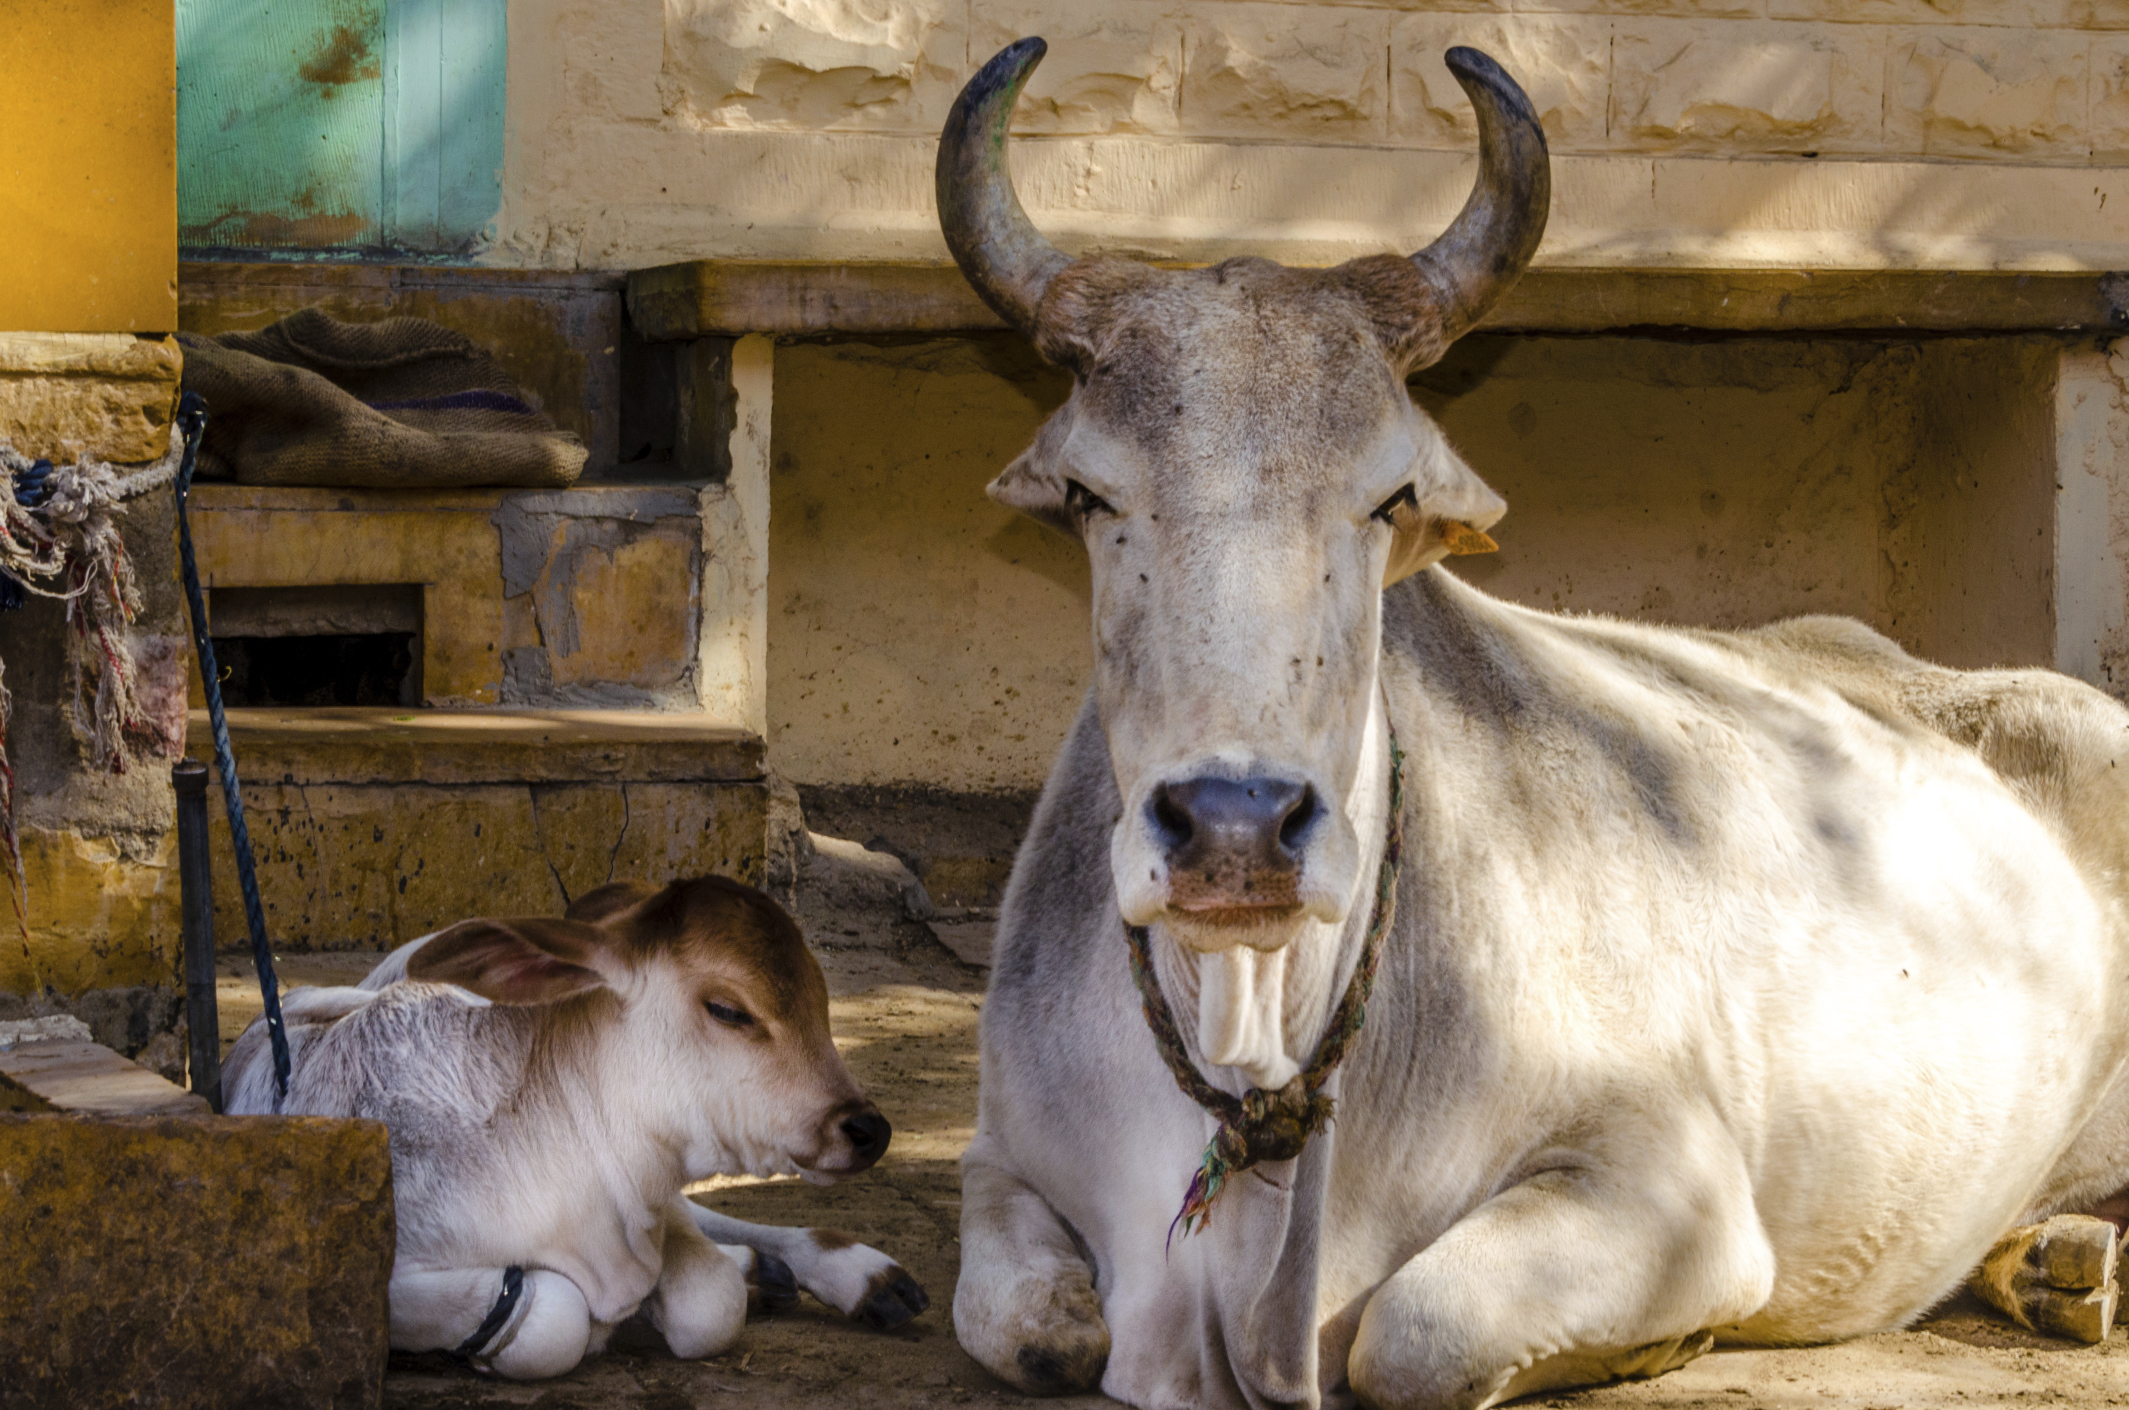 Haryana, India enacts a new cow protection law that bans sale of beef